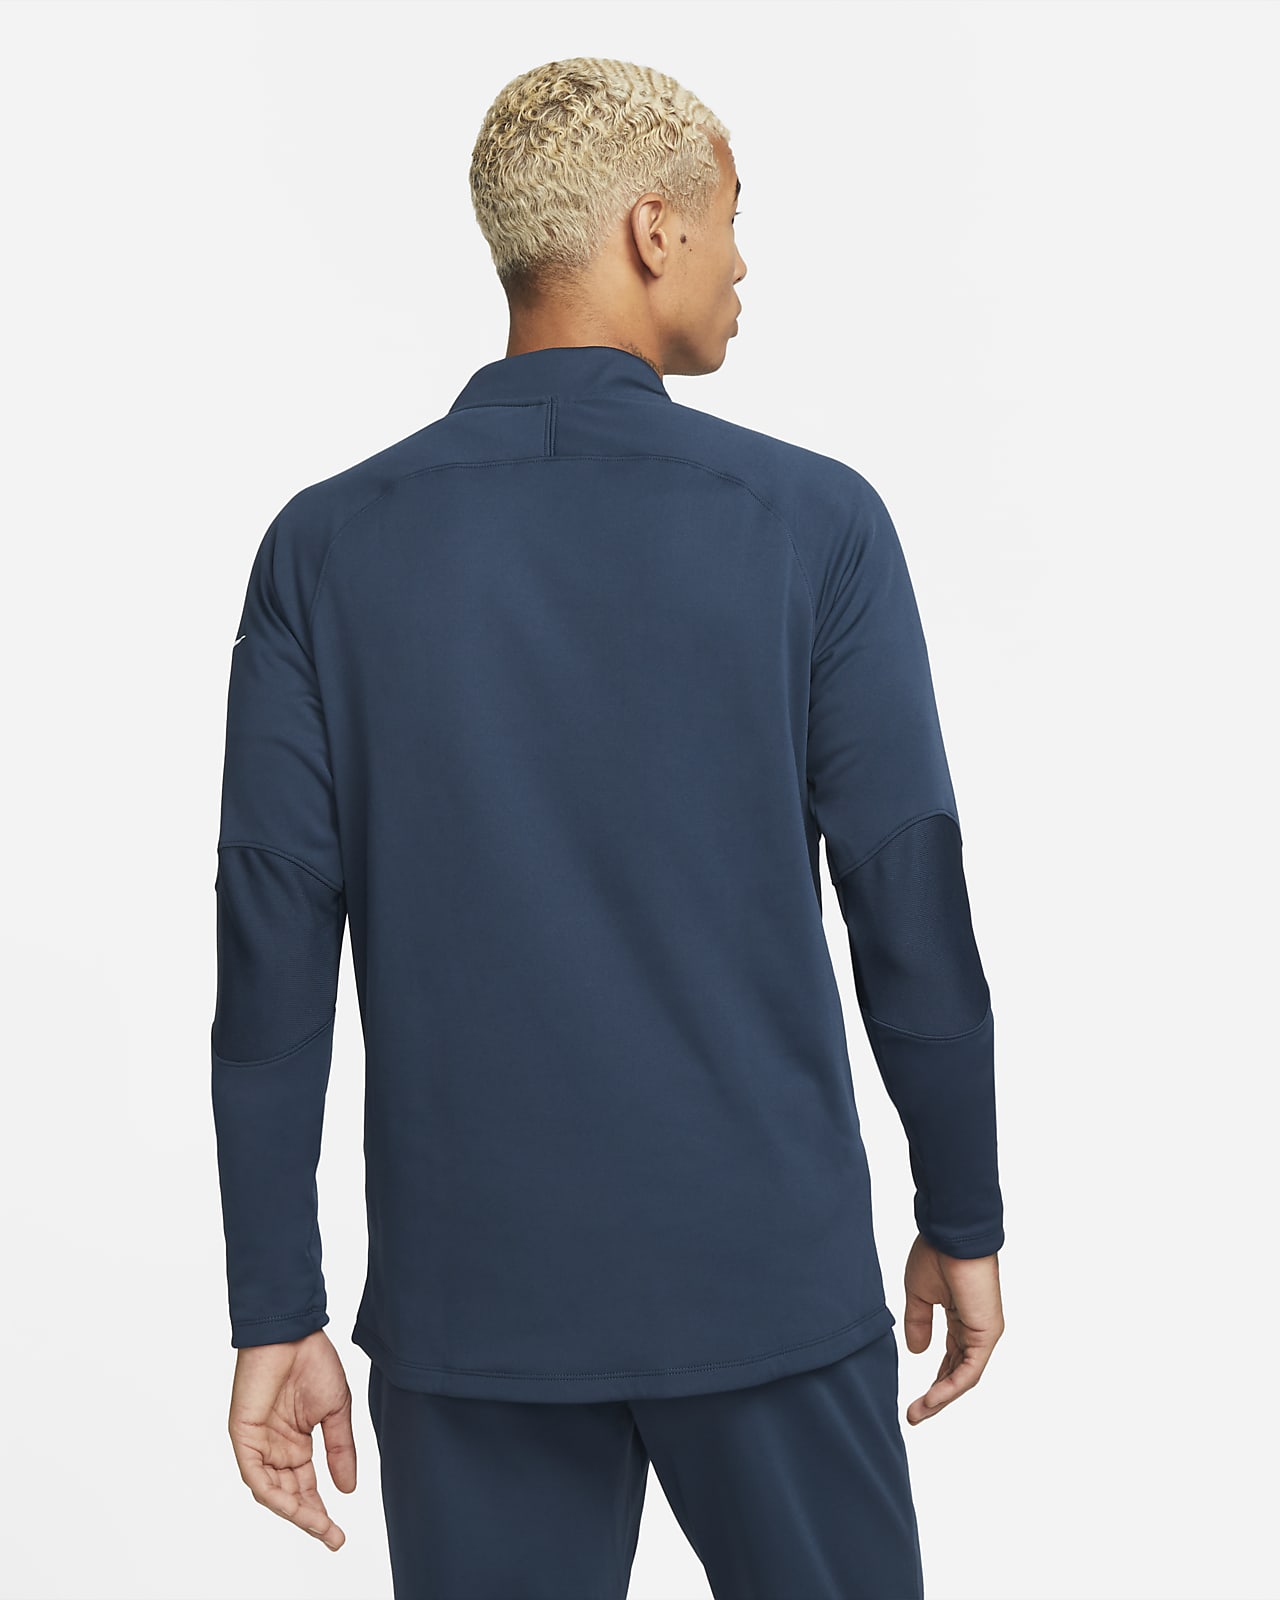 Mes Tendencia Respeto a ti mismo Nike Therma-FIT Academy Winter Warrior Men's Football Drill Top. Nike IE